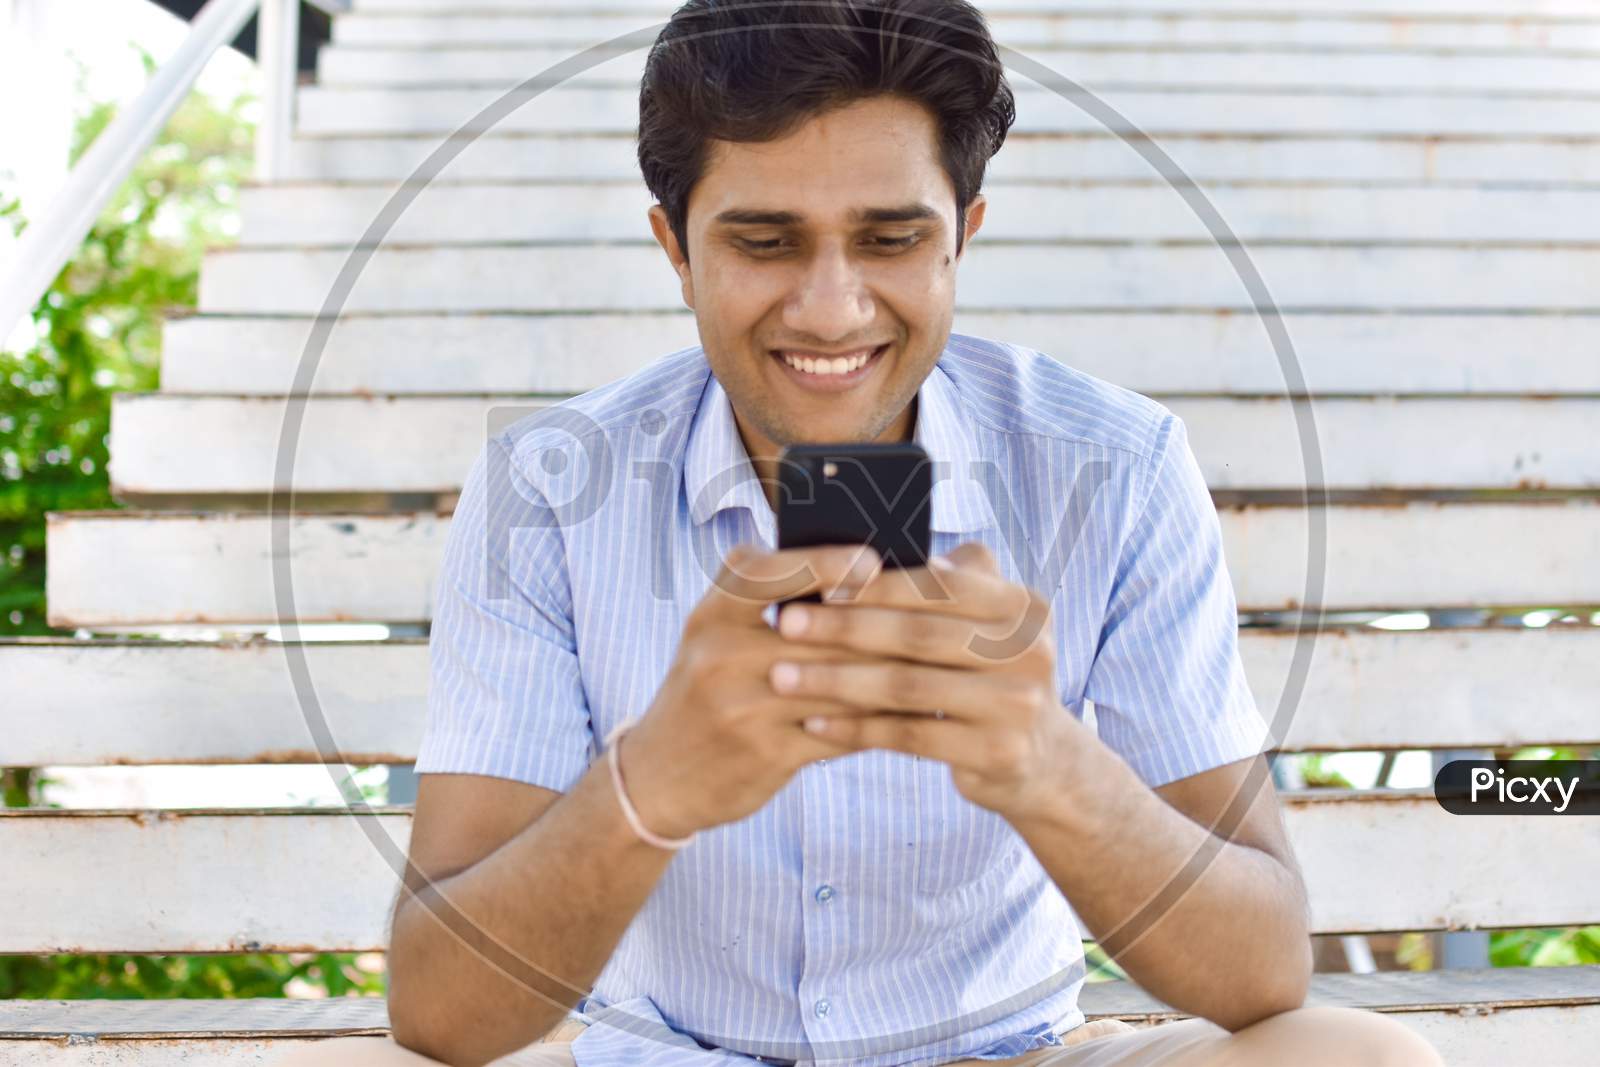 indian college student playing mobile phone